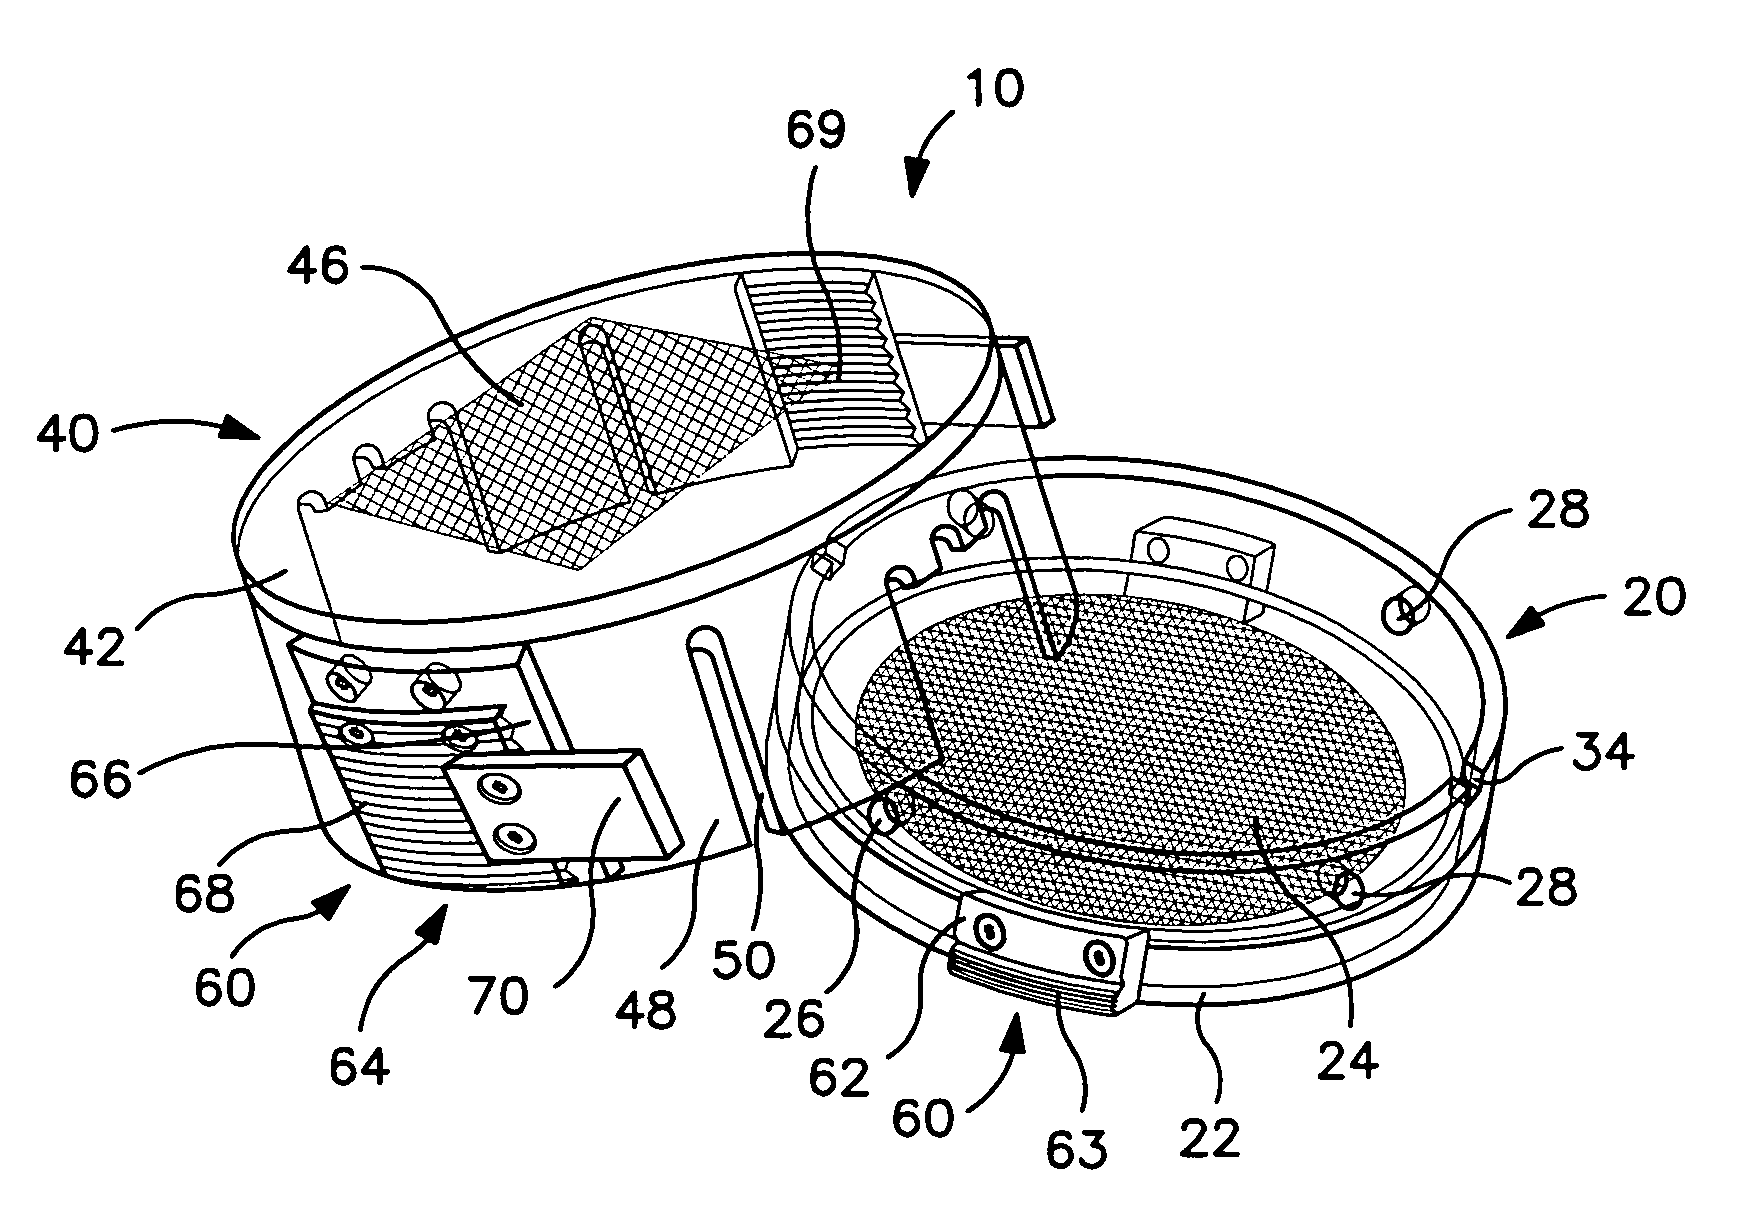 Device for containing and analyzing surgically excised tissue and related methods